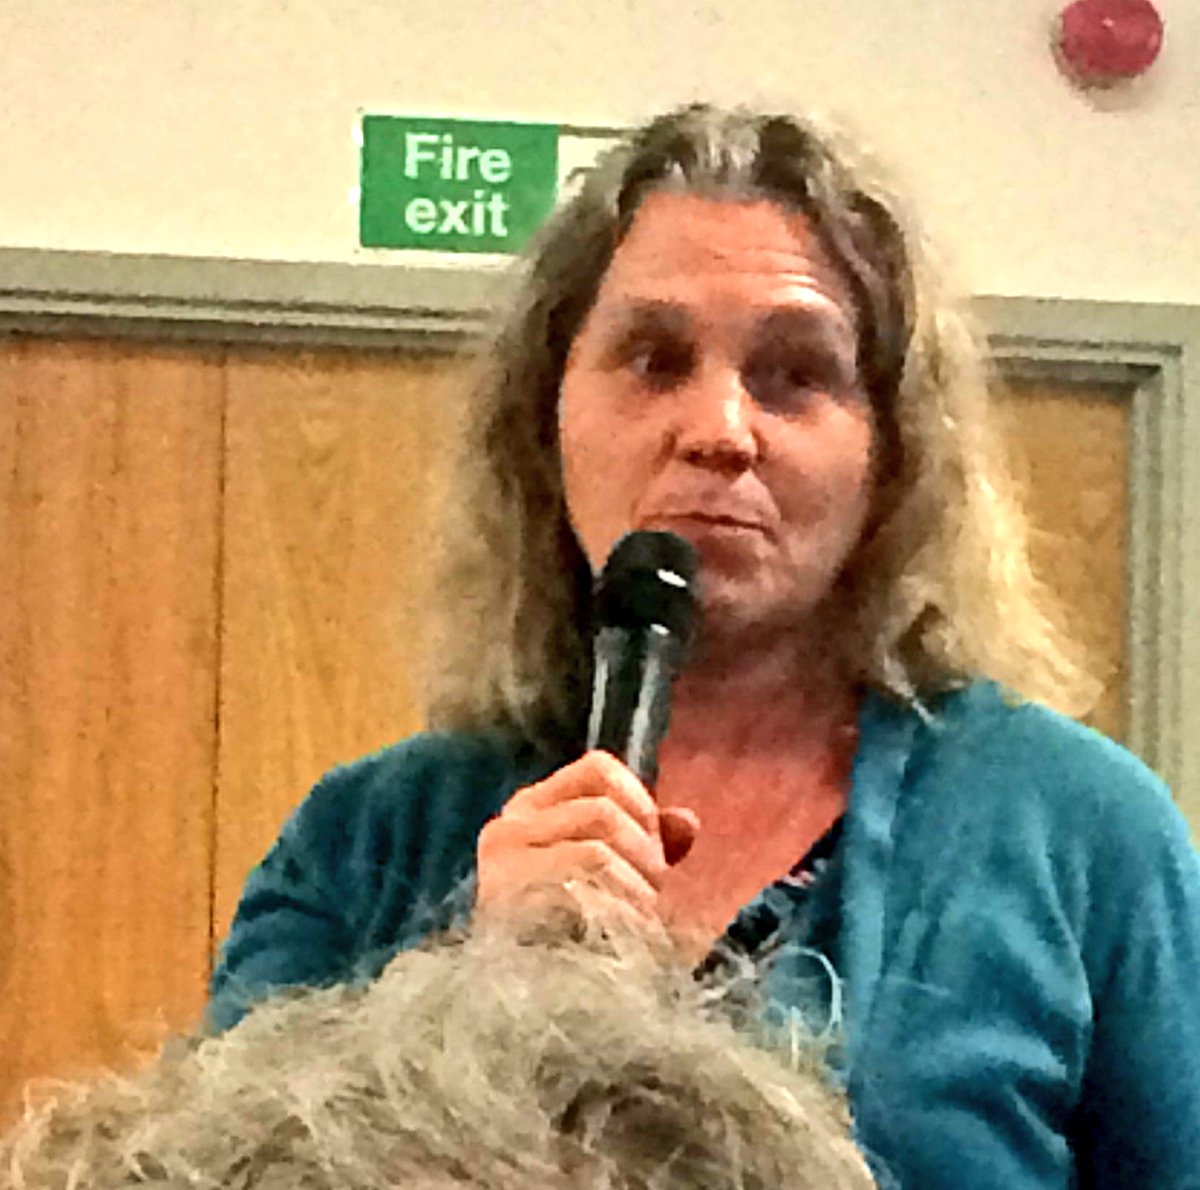 Gabe Crisp, party member, talking about traffic impact on her children in Lancing at the Adur Residents Environment Action meeting tonight. #Greenpolitics #GreenCommunities